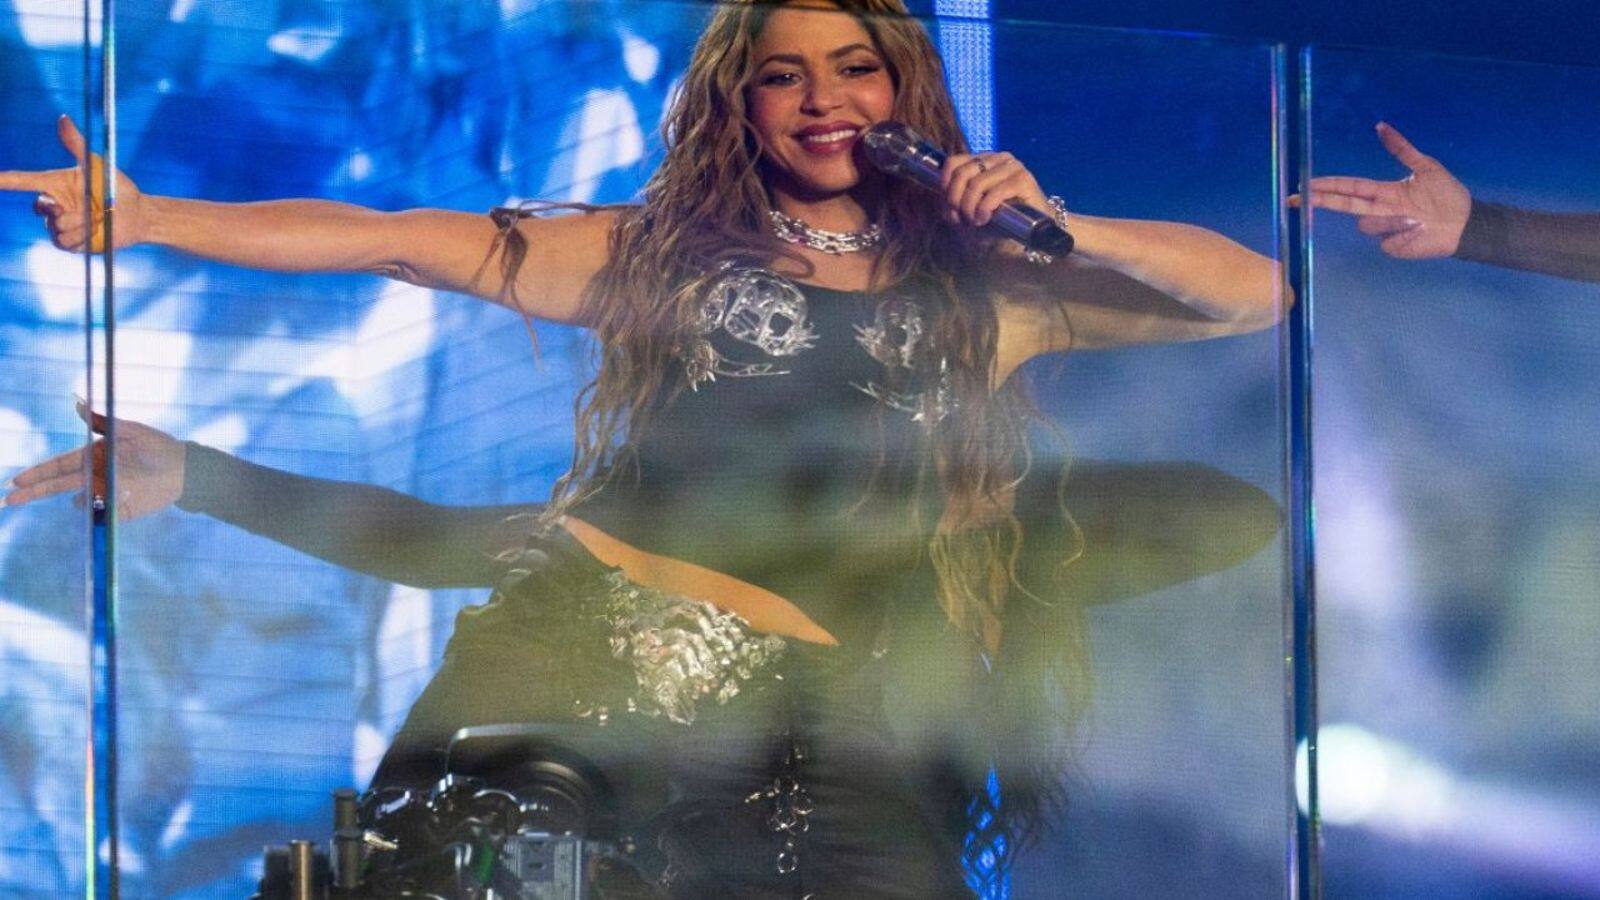 Shakira's impromptu concert in Times Square garners 40,000 audience